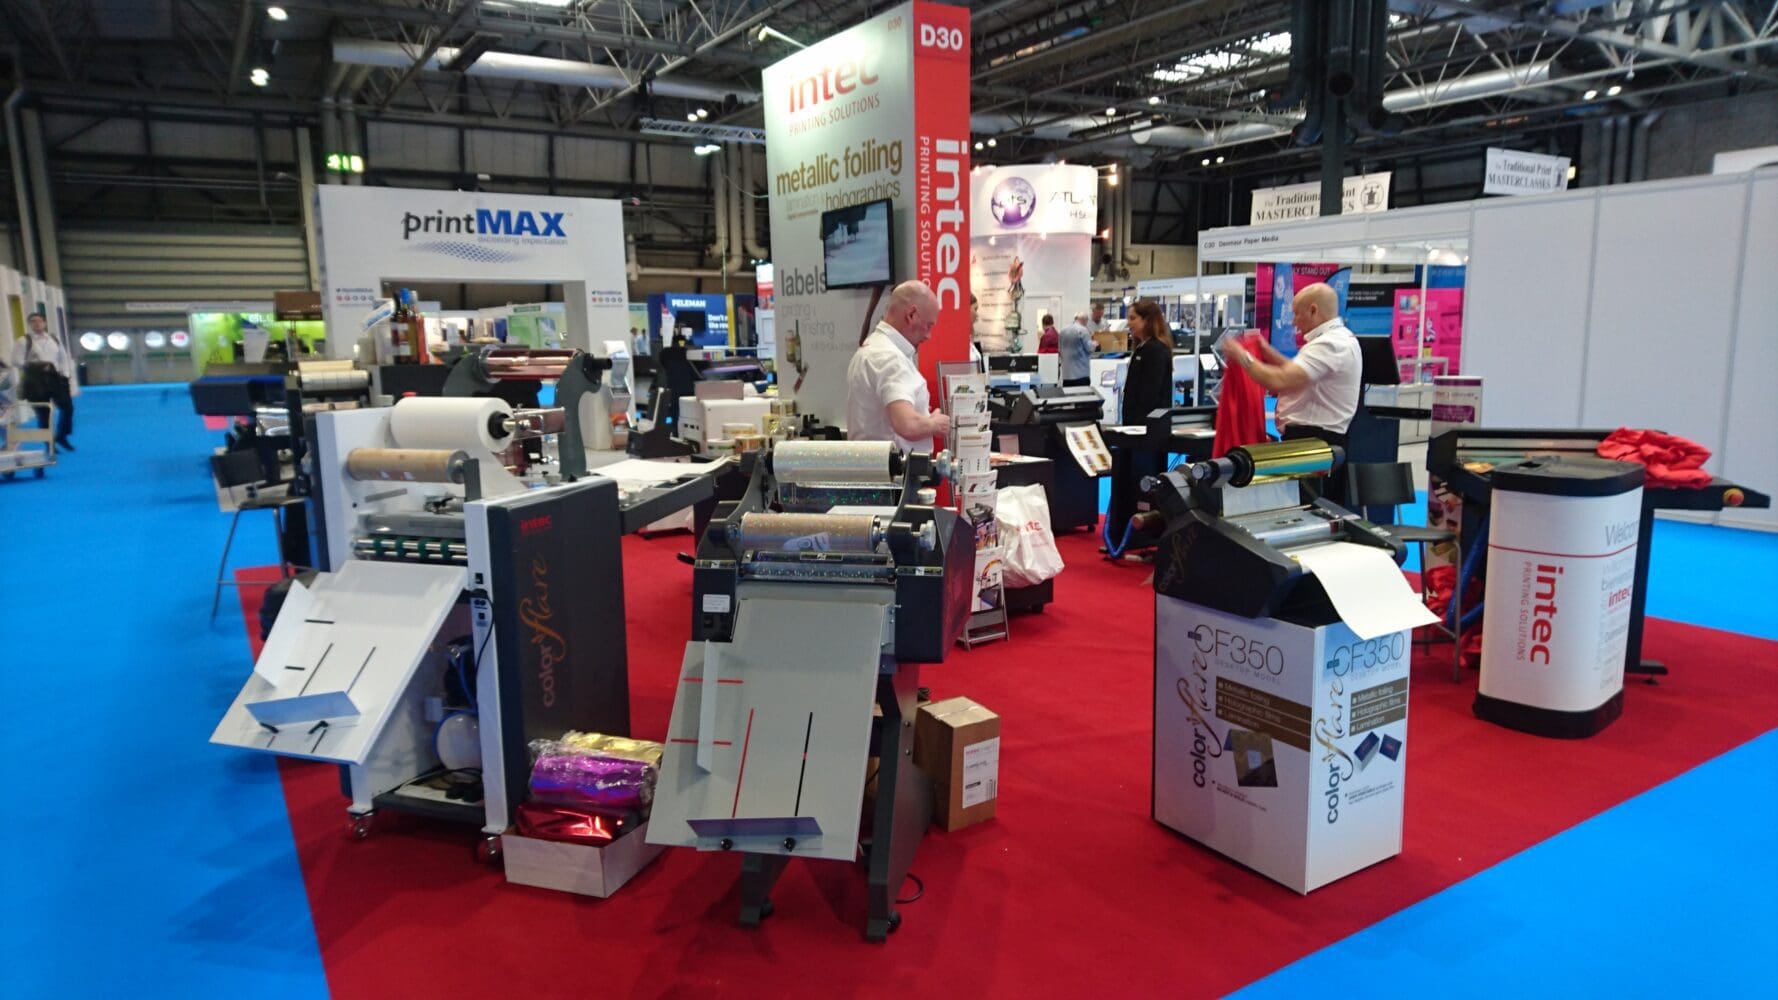 Intec Stand D30 at The Print Show 2018